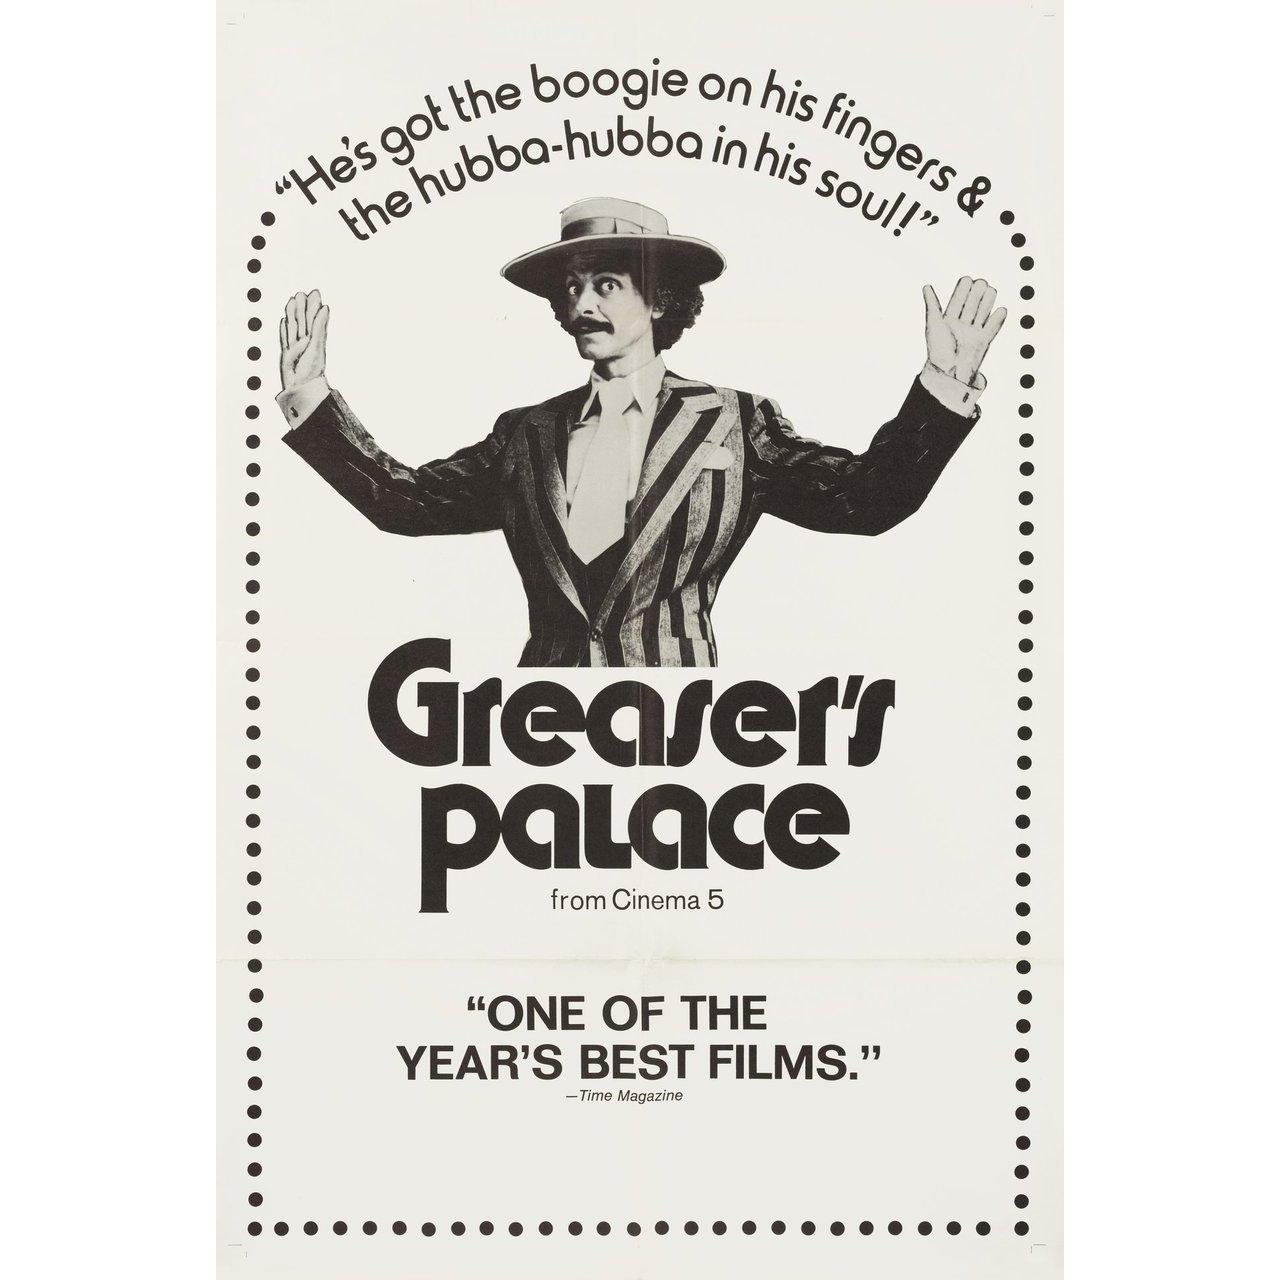 Original 1972 U.S. one sheet poster for the film Greaser's Palace directed by Robert Downey Sr. with Albert Henderson / Michael Sullivan / Luana Anders / George Morgan. Very Good-Fine condition, folded. Many original posters were issued folded or